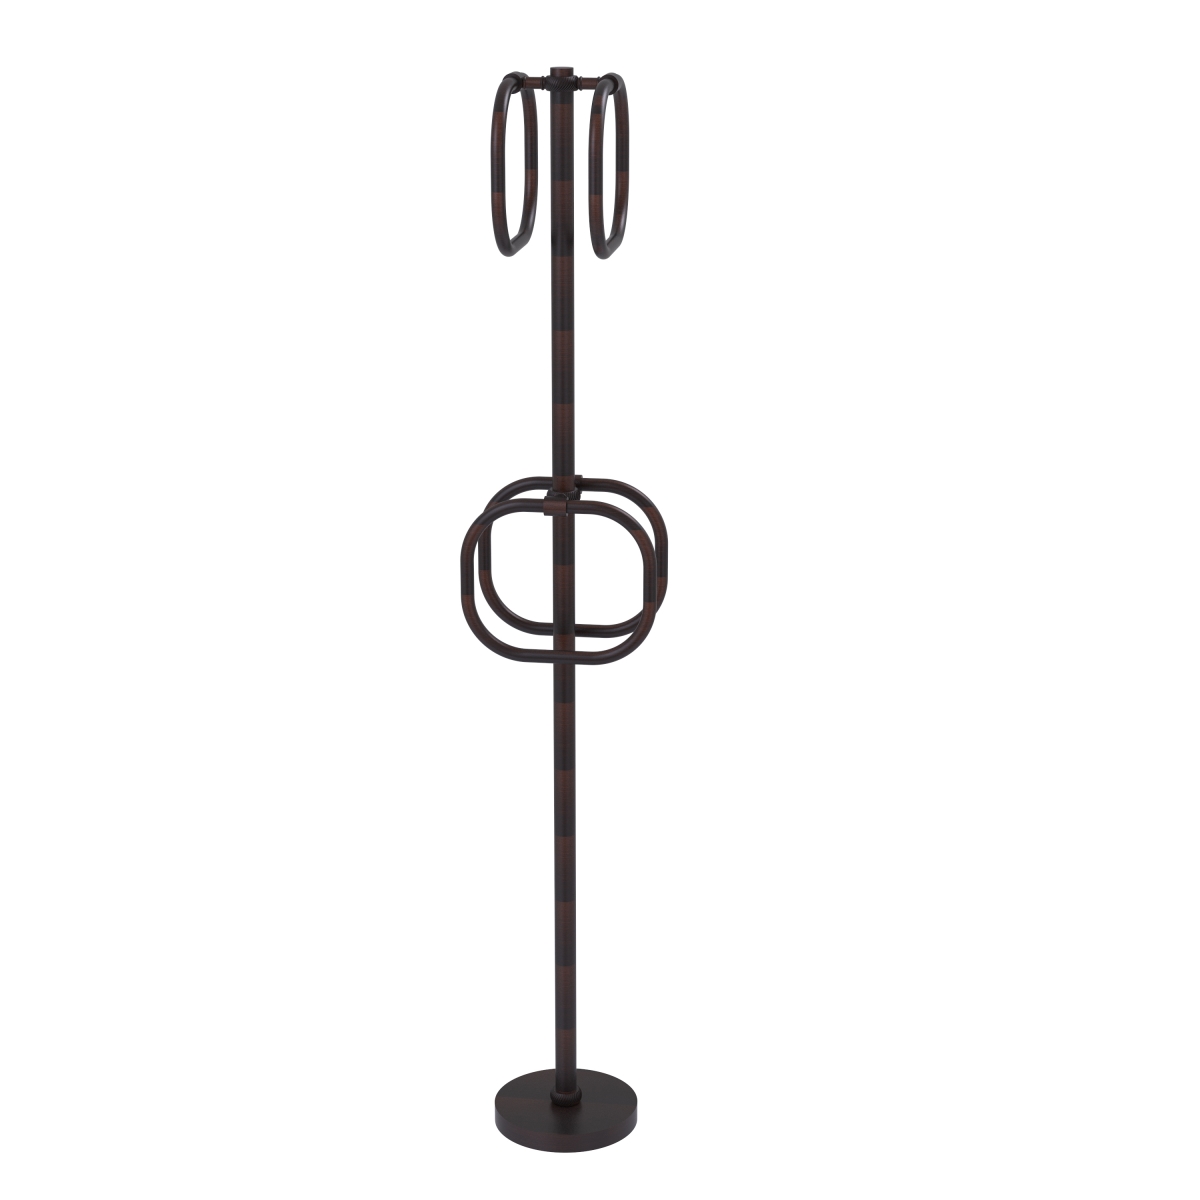 Allied Brass TS-40T-VB Towel Stand with 4 Integrated Towel Rings, Venetian Bronze - 49 x 9.25 x 9 in.